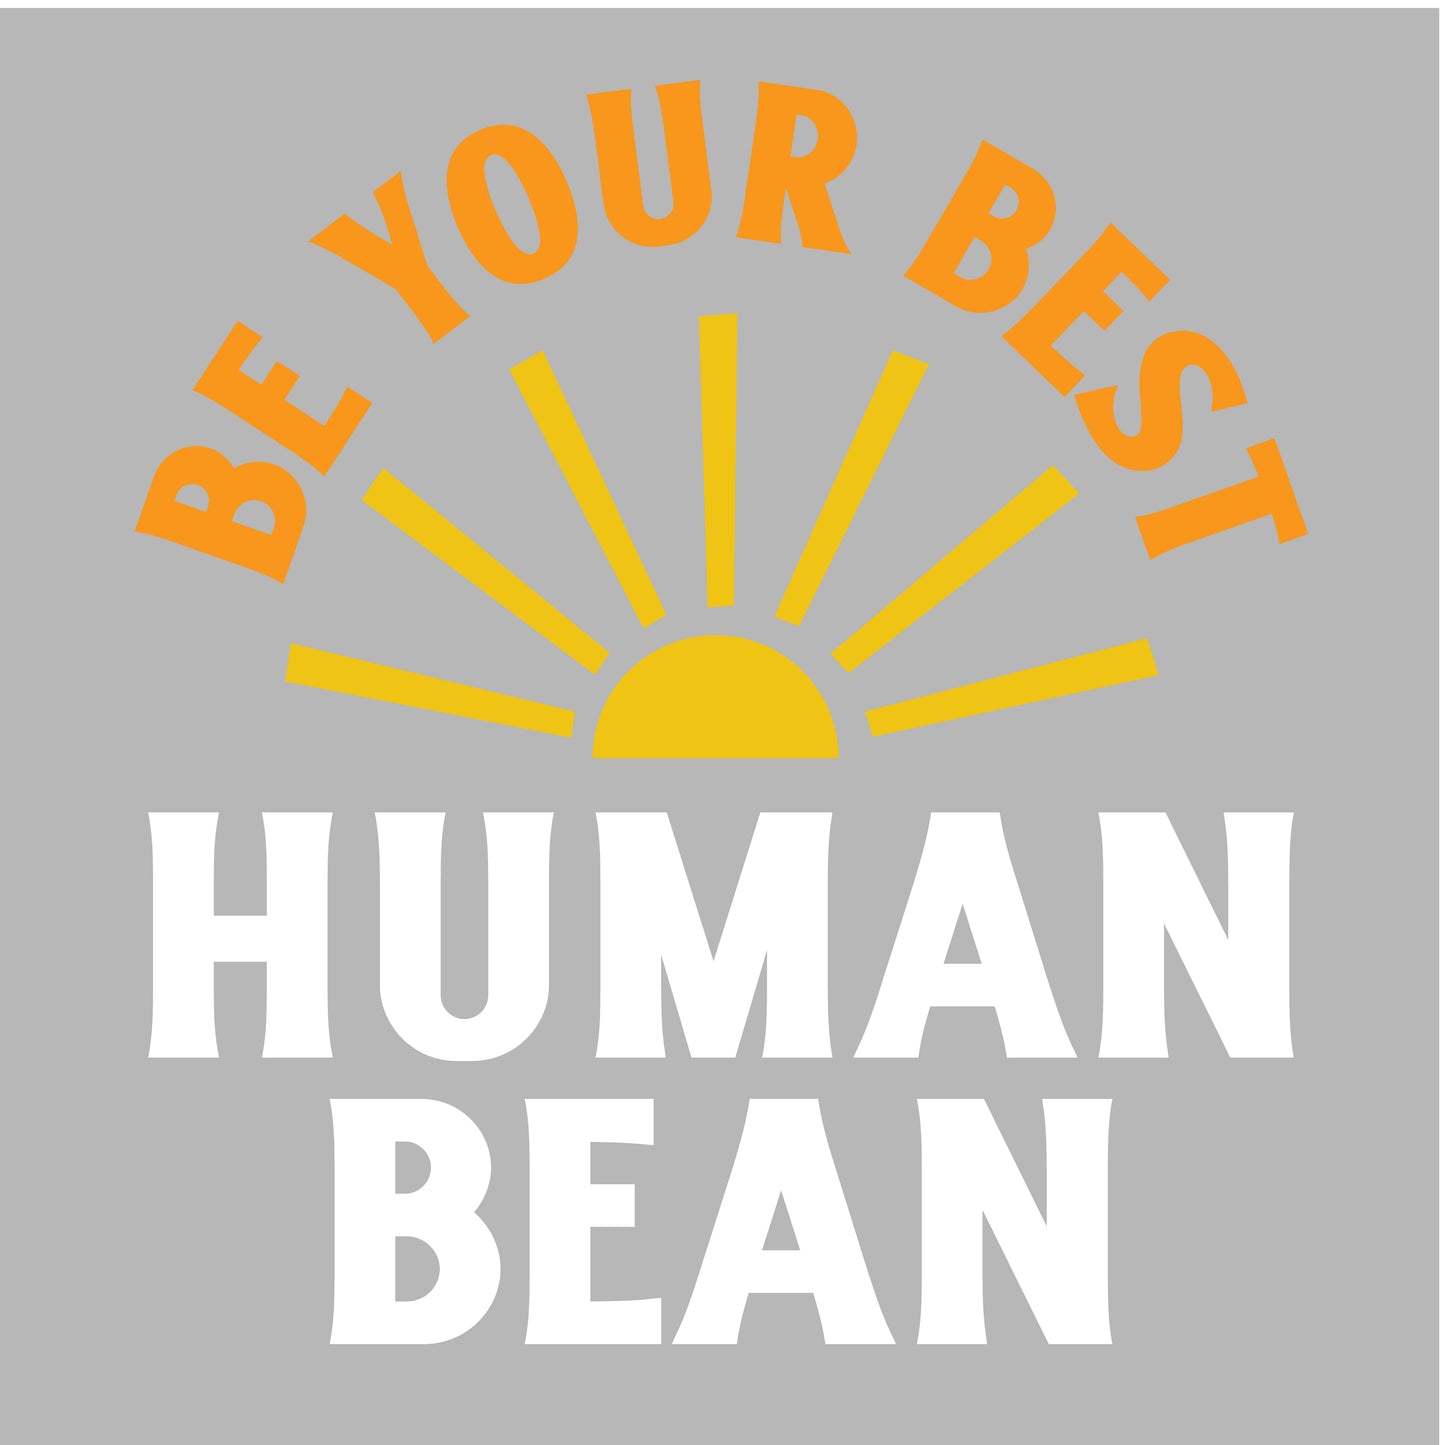 Be Your Best Human Bean Decal